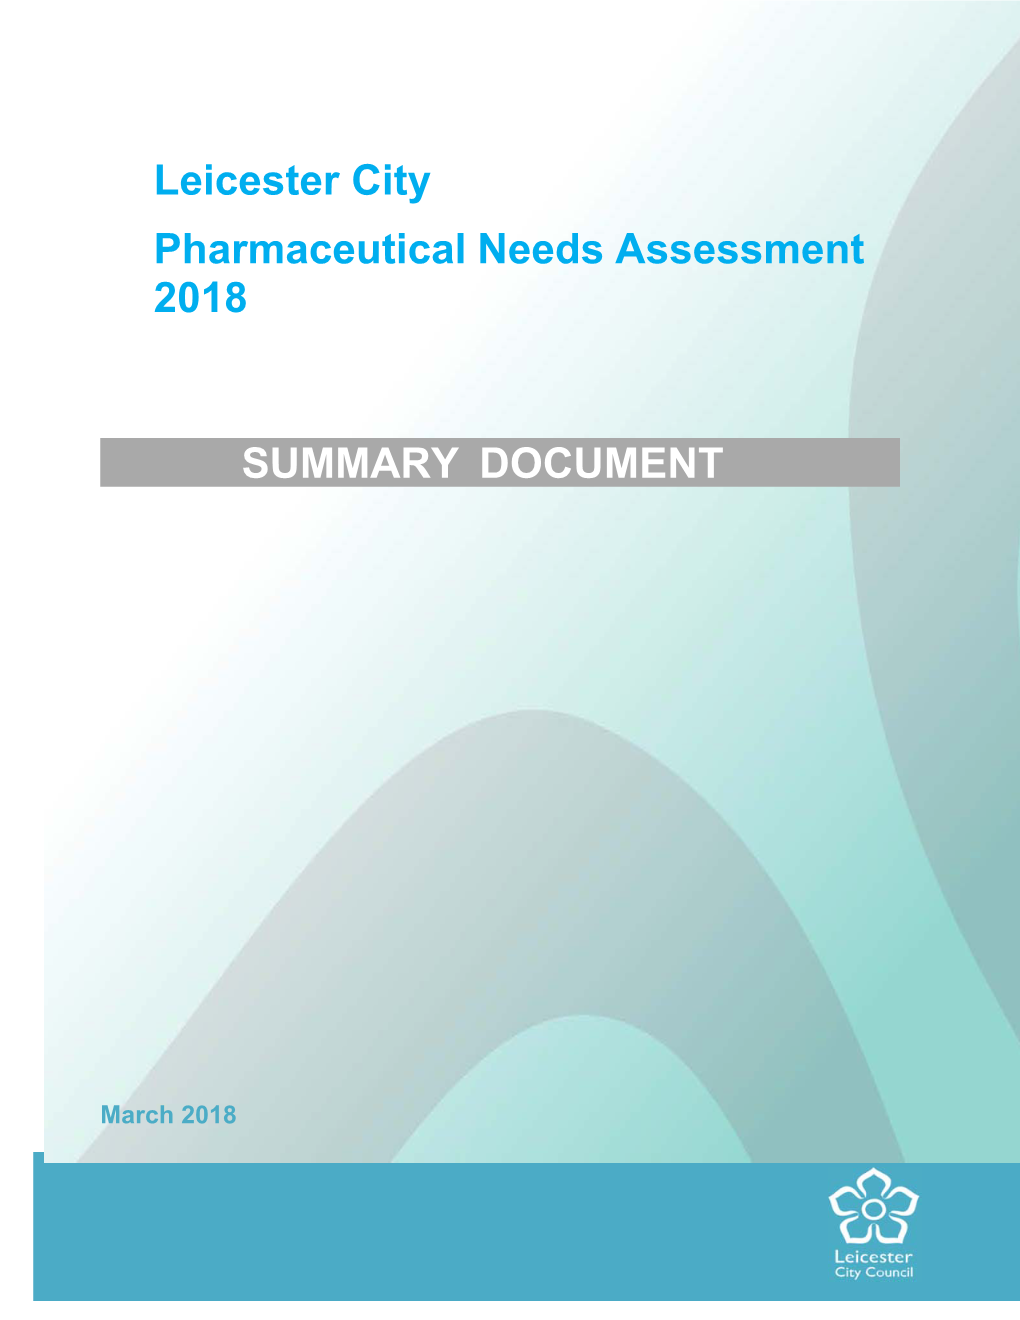 Leicester City Pharmaceutical Needs Assessment 2018 SUMMARY